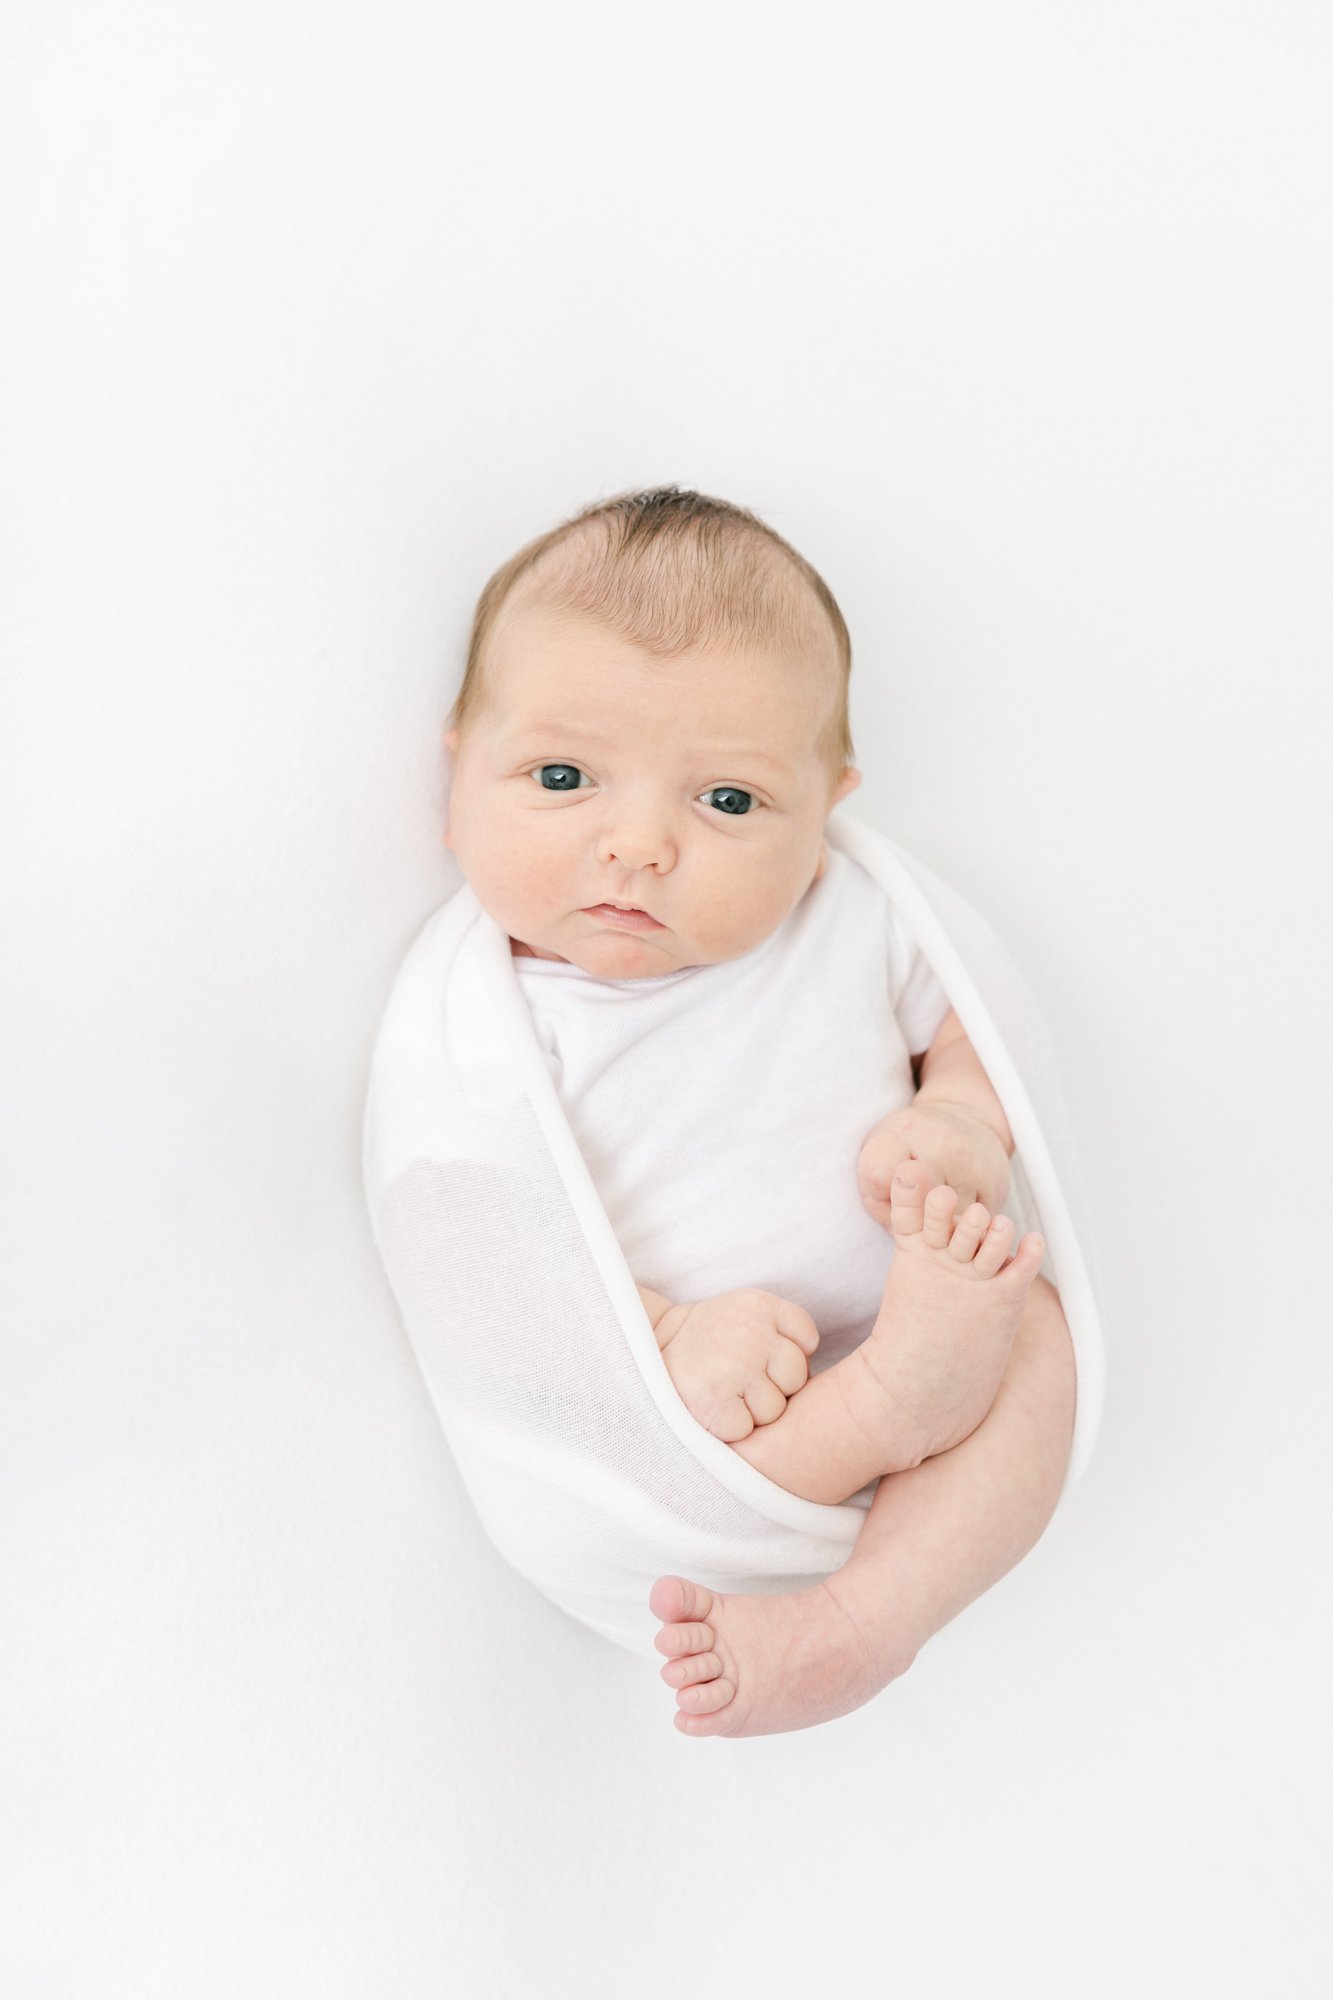  Cutest little newborn wrapped in a swaddle. Cozy newborn pictures vibes. Wide eye baby picture from above in a luxury studio session captured by Nicole Hawkins Photography in New Jersey. #newbornportraits #newbornstudioshoots #NewJerseyPhotographers